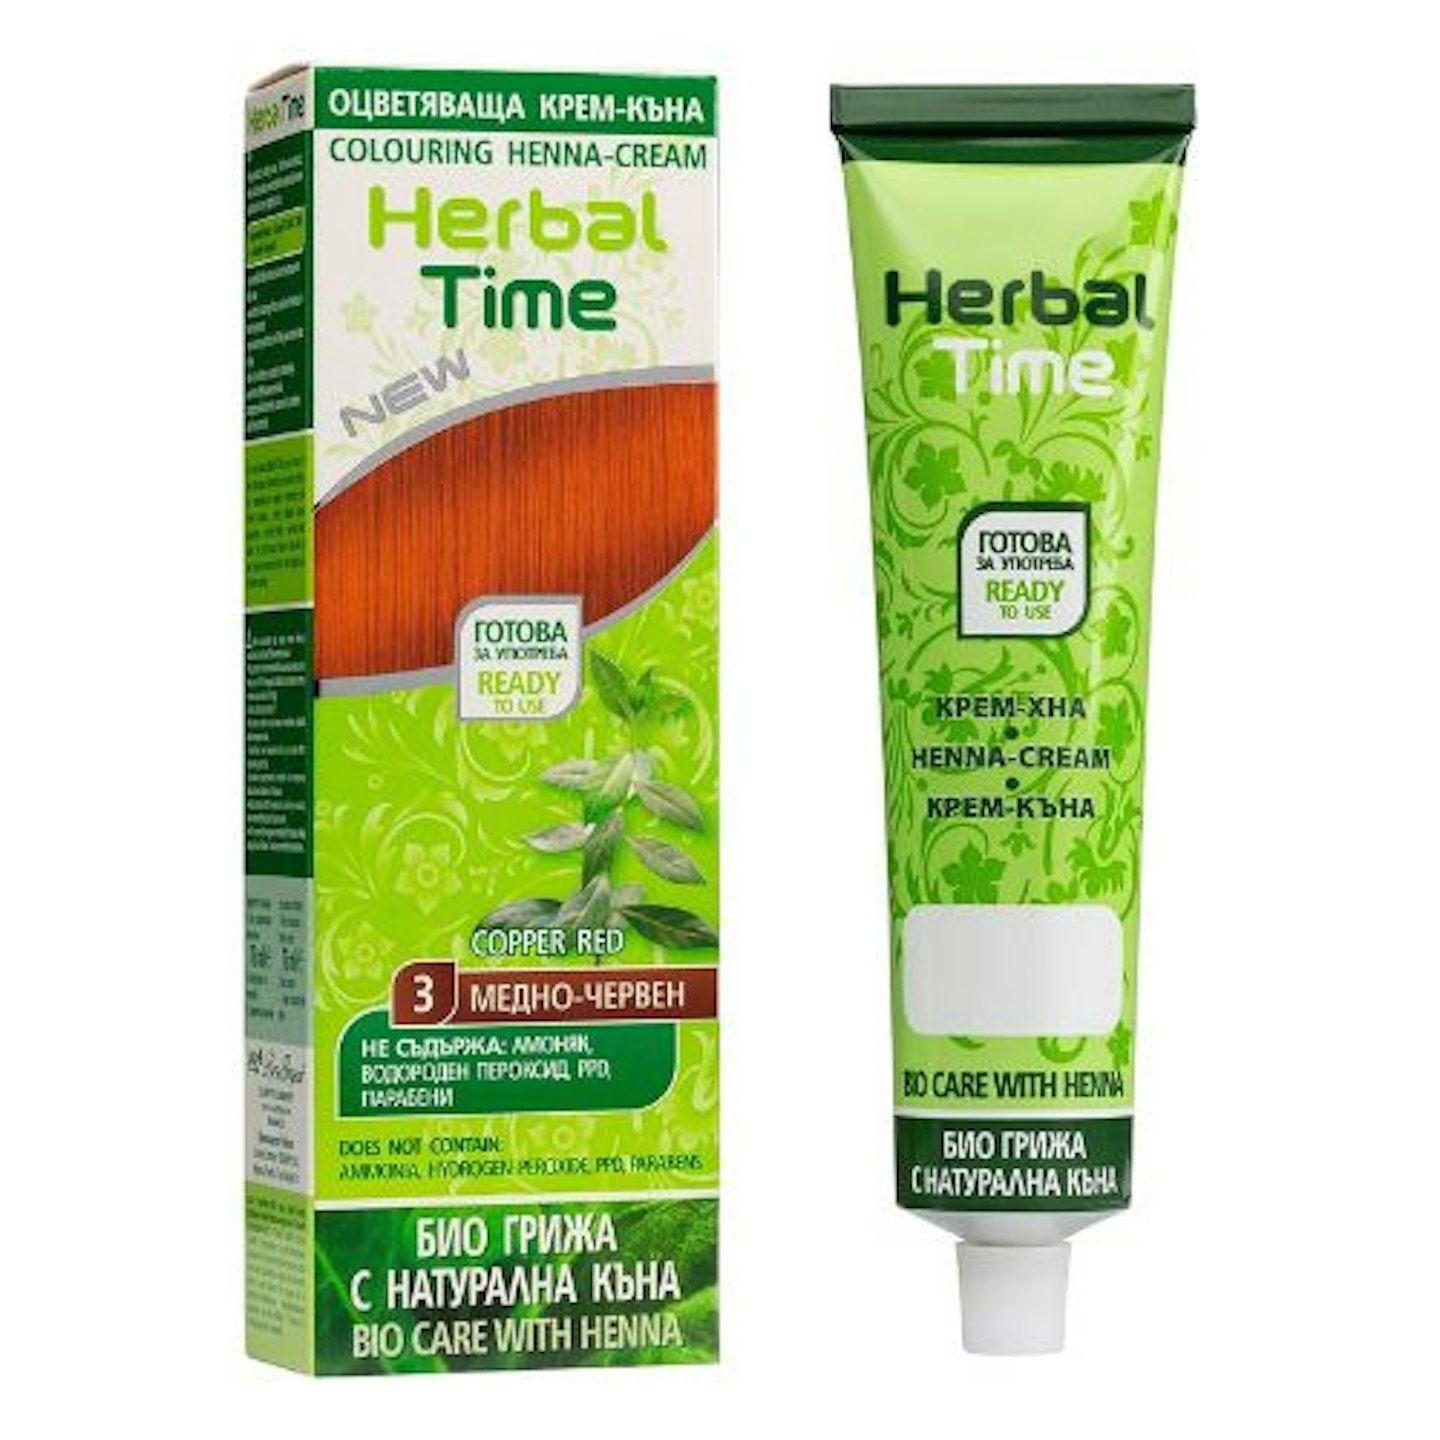 Herbal Time Henna Natural Cream Colour in Coppery Red